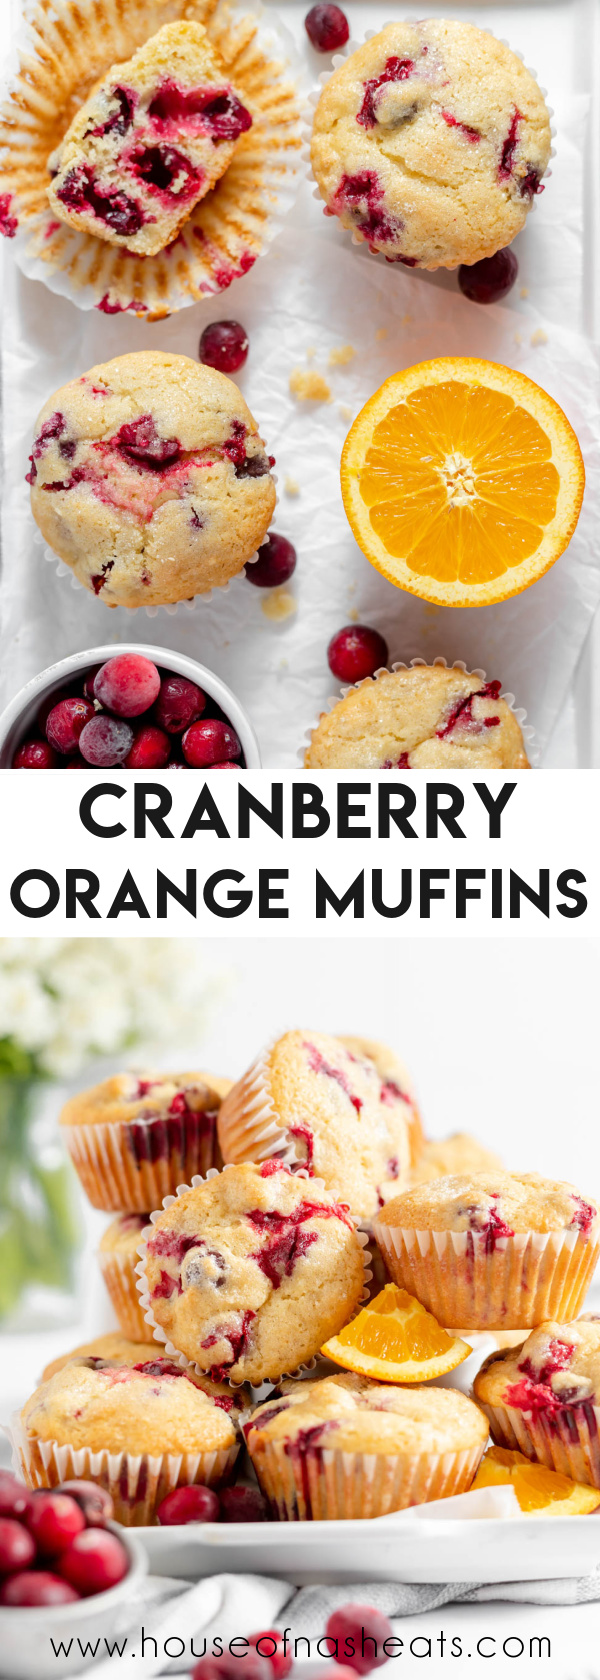 A collage of images of cranberry orange muffins with text overlay.